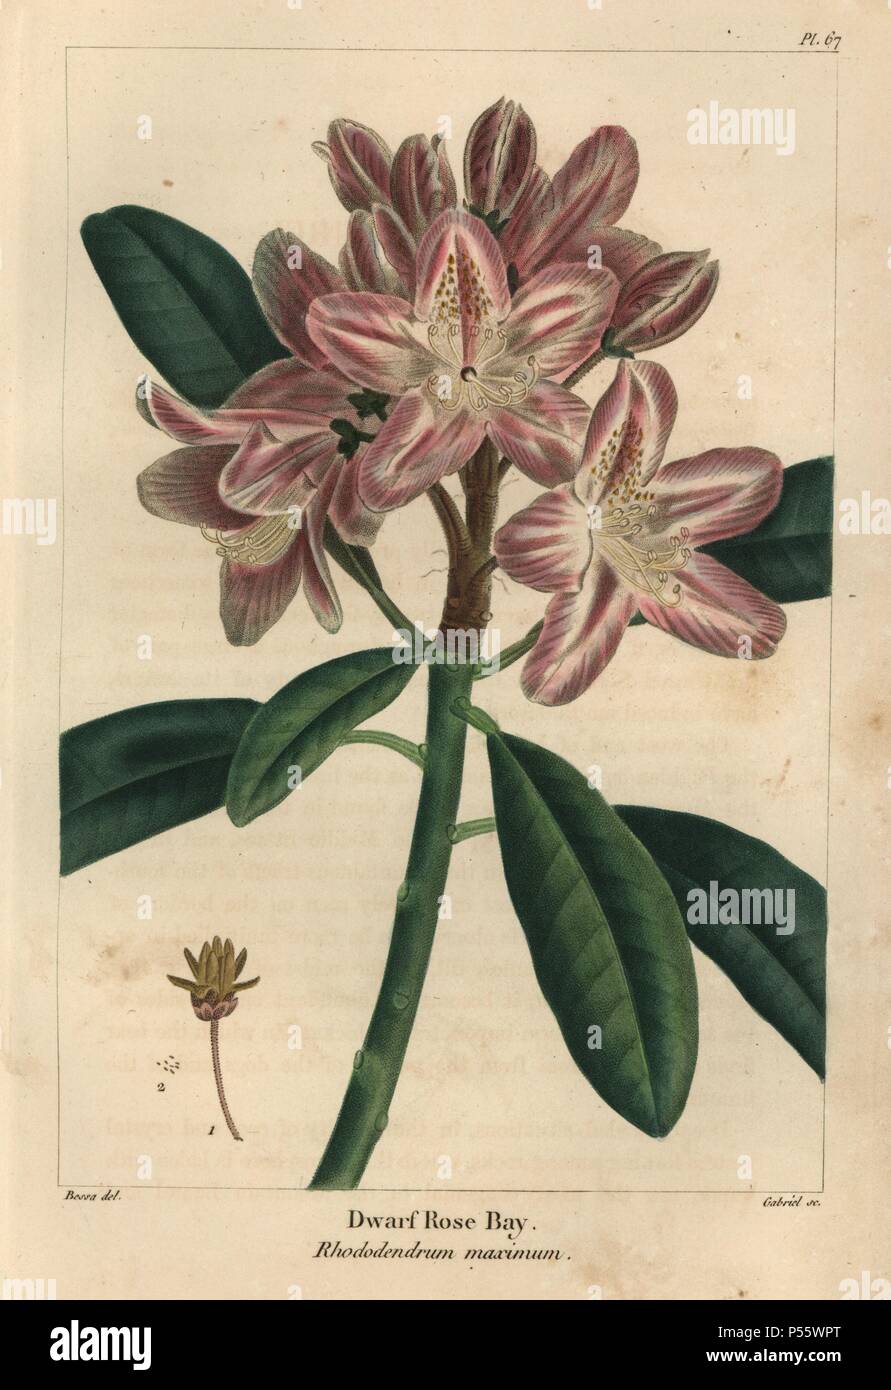 Flower, leaves, seed vessel and seeds of the Dwarf rose bay or mountain laurel tree, Rhododendrum maximum. Handcolored stipple engraving from a botanical illustration by Pancrace Bessa, engraved on copper by Gabriel, from Francois Andre Michaux's 'North American Sylva,' Philadelphia, 1857. French botanist Michaux (1770-1855) explored America and Canada in 1785 cataloging its native trees. Stock Photo